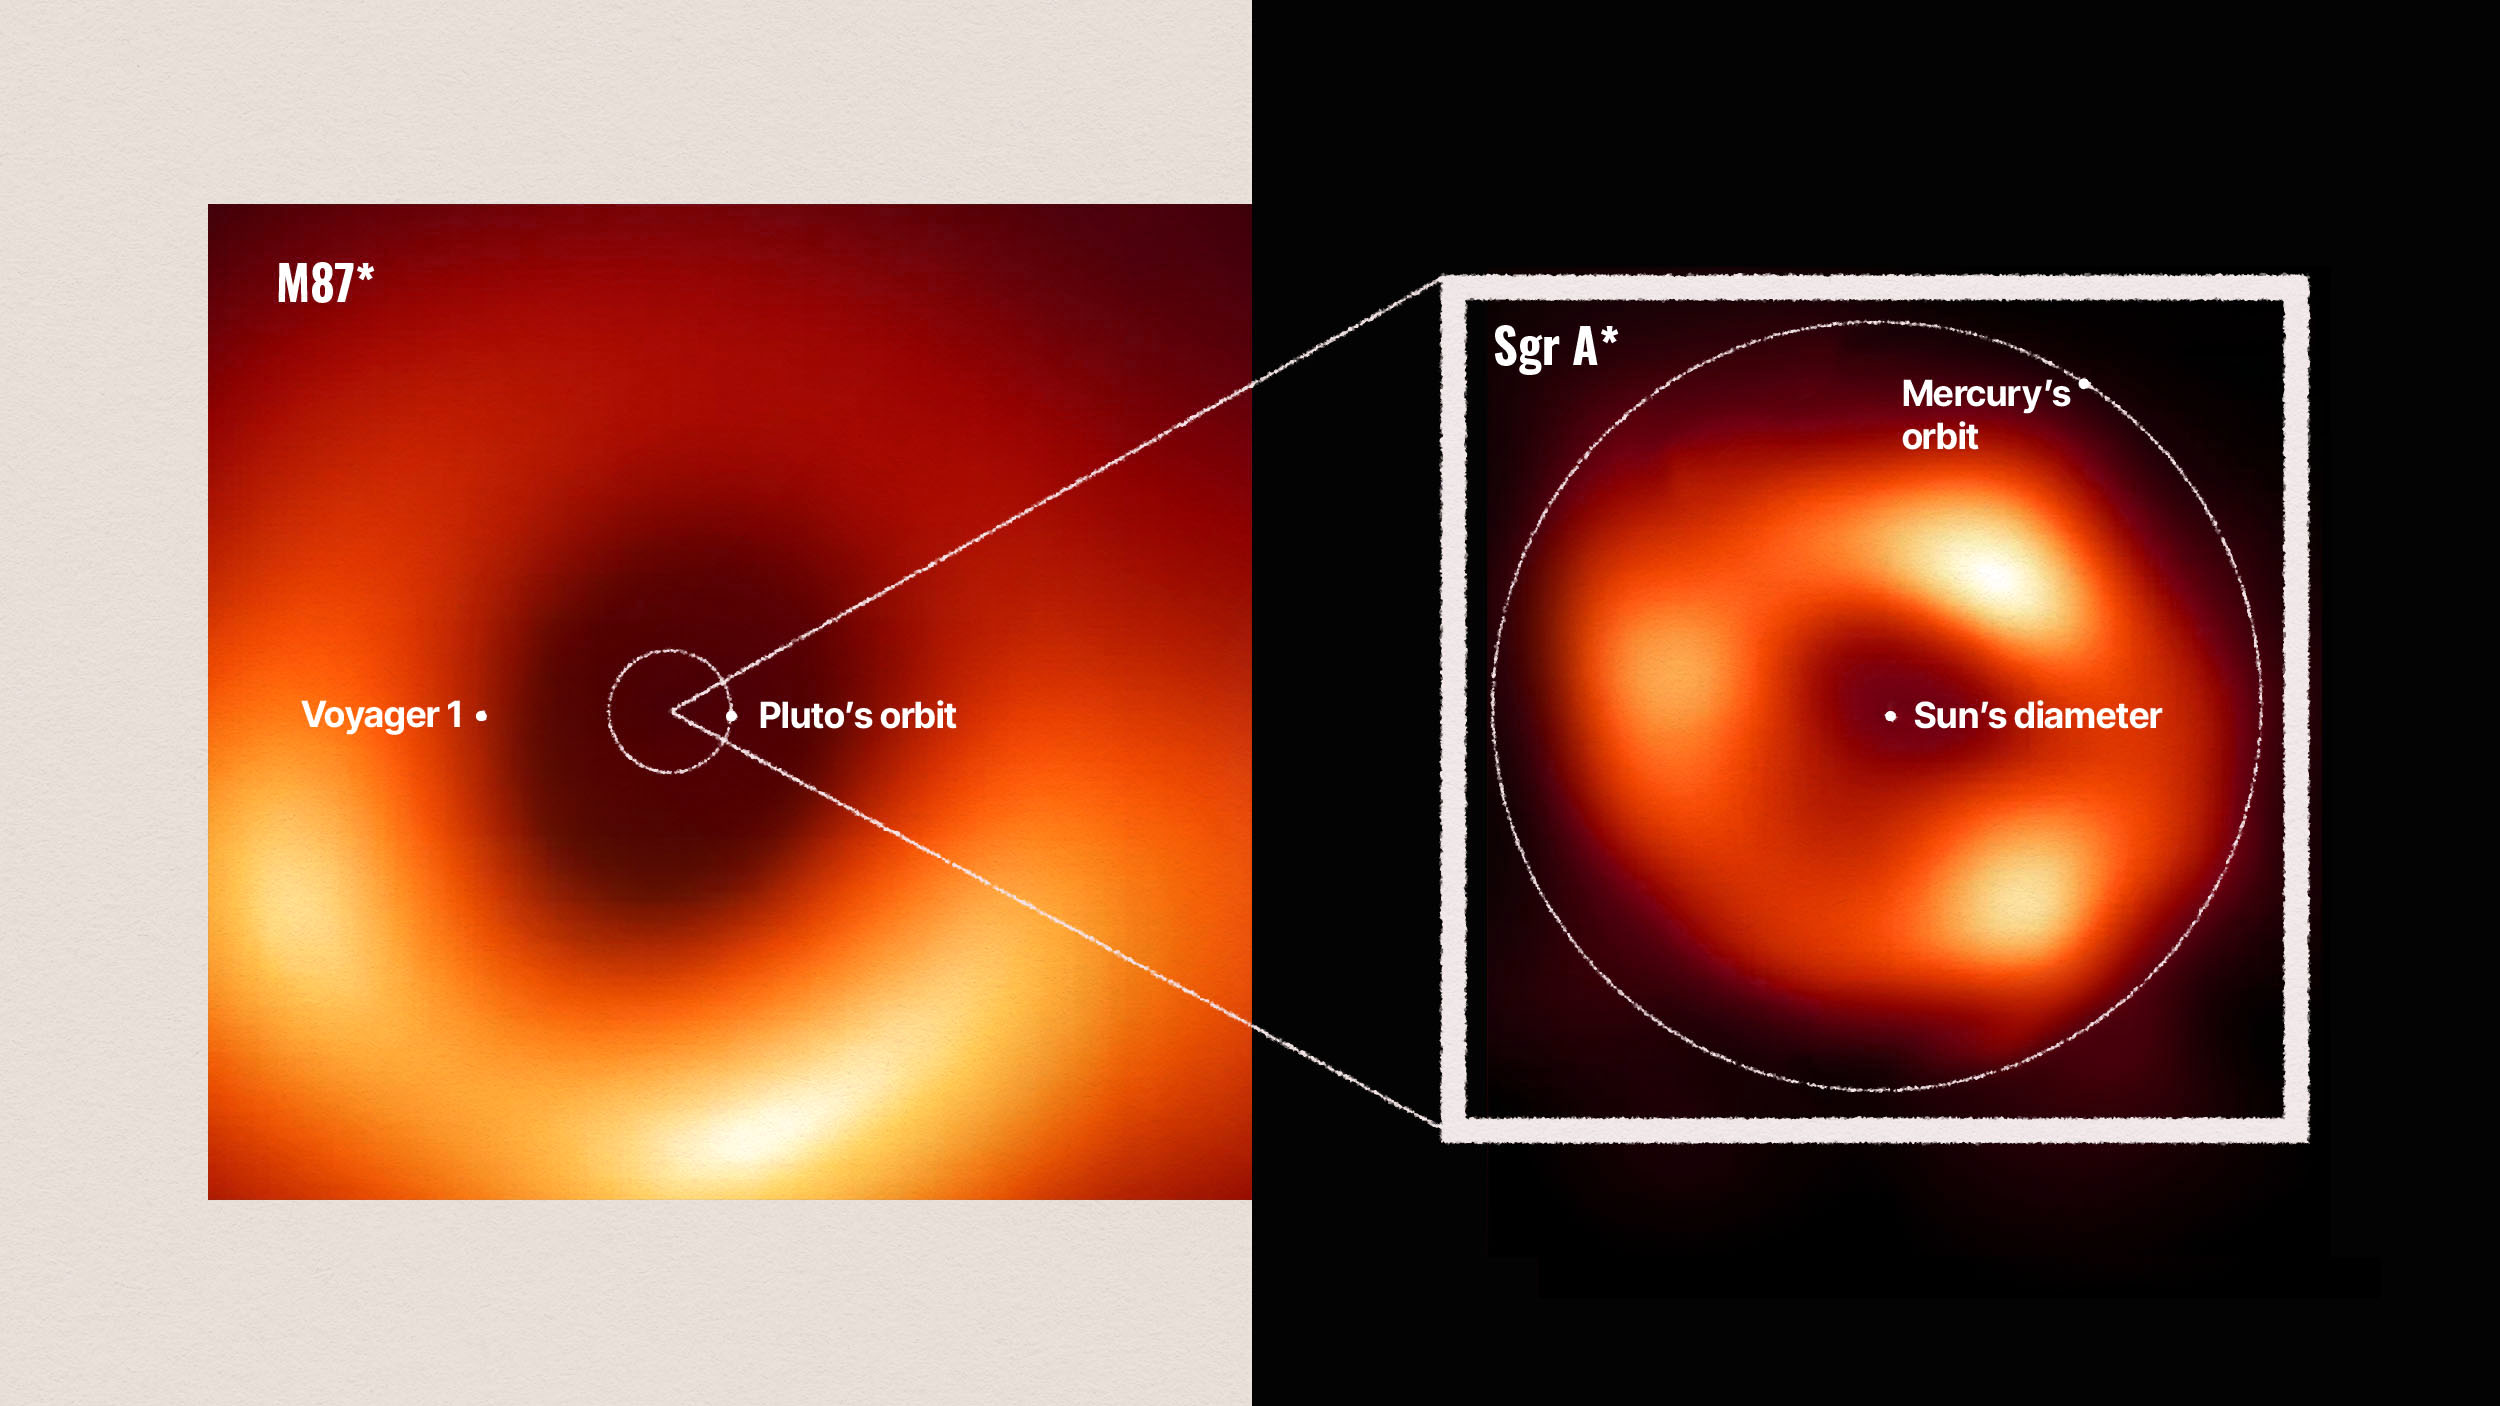 This description features an image of a black hole and an image of a spiral galaxy, breaking the barriers of 10 biggest physics astronomy lies.